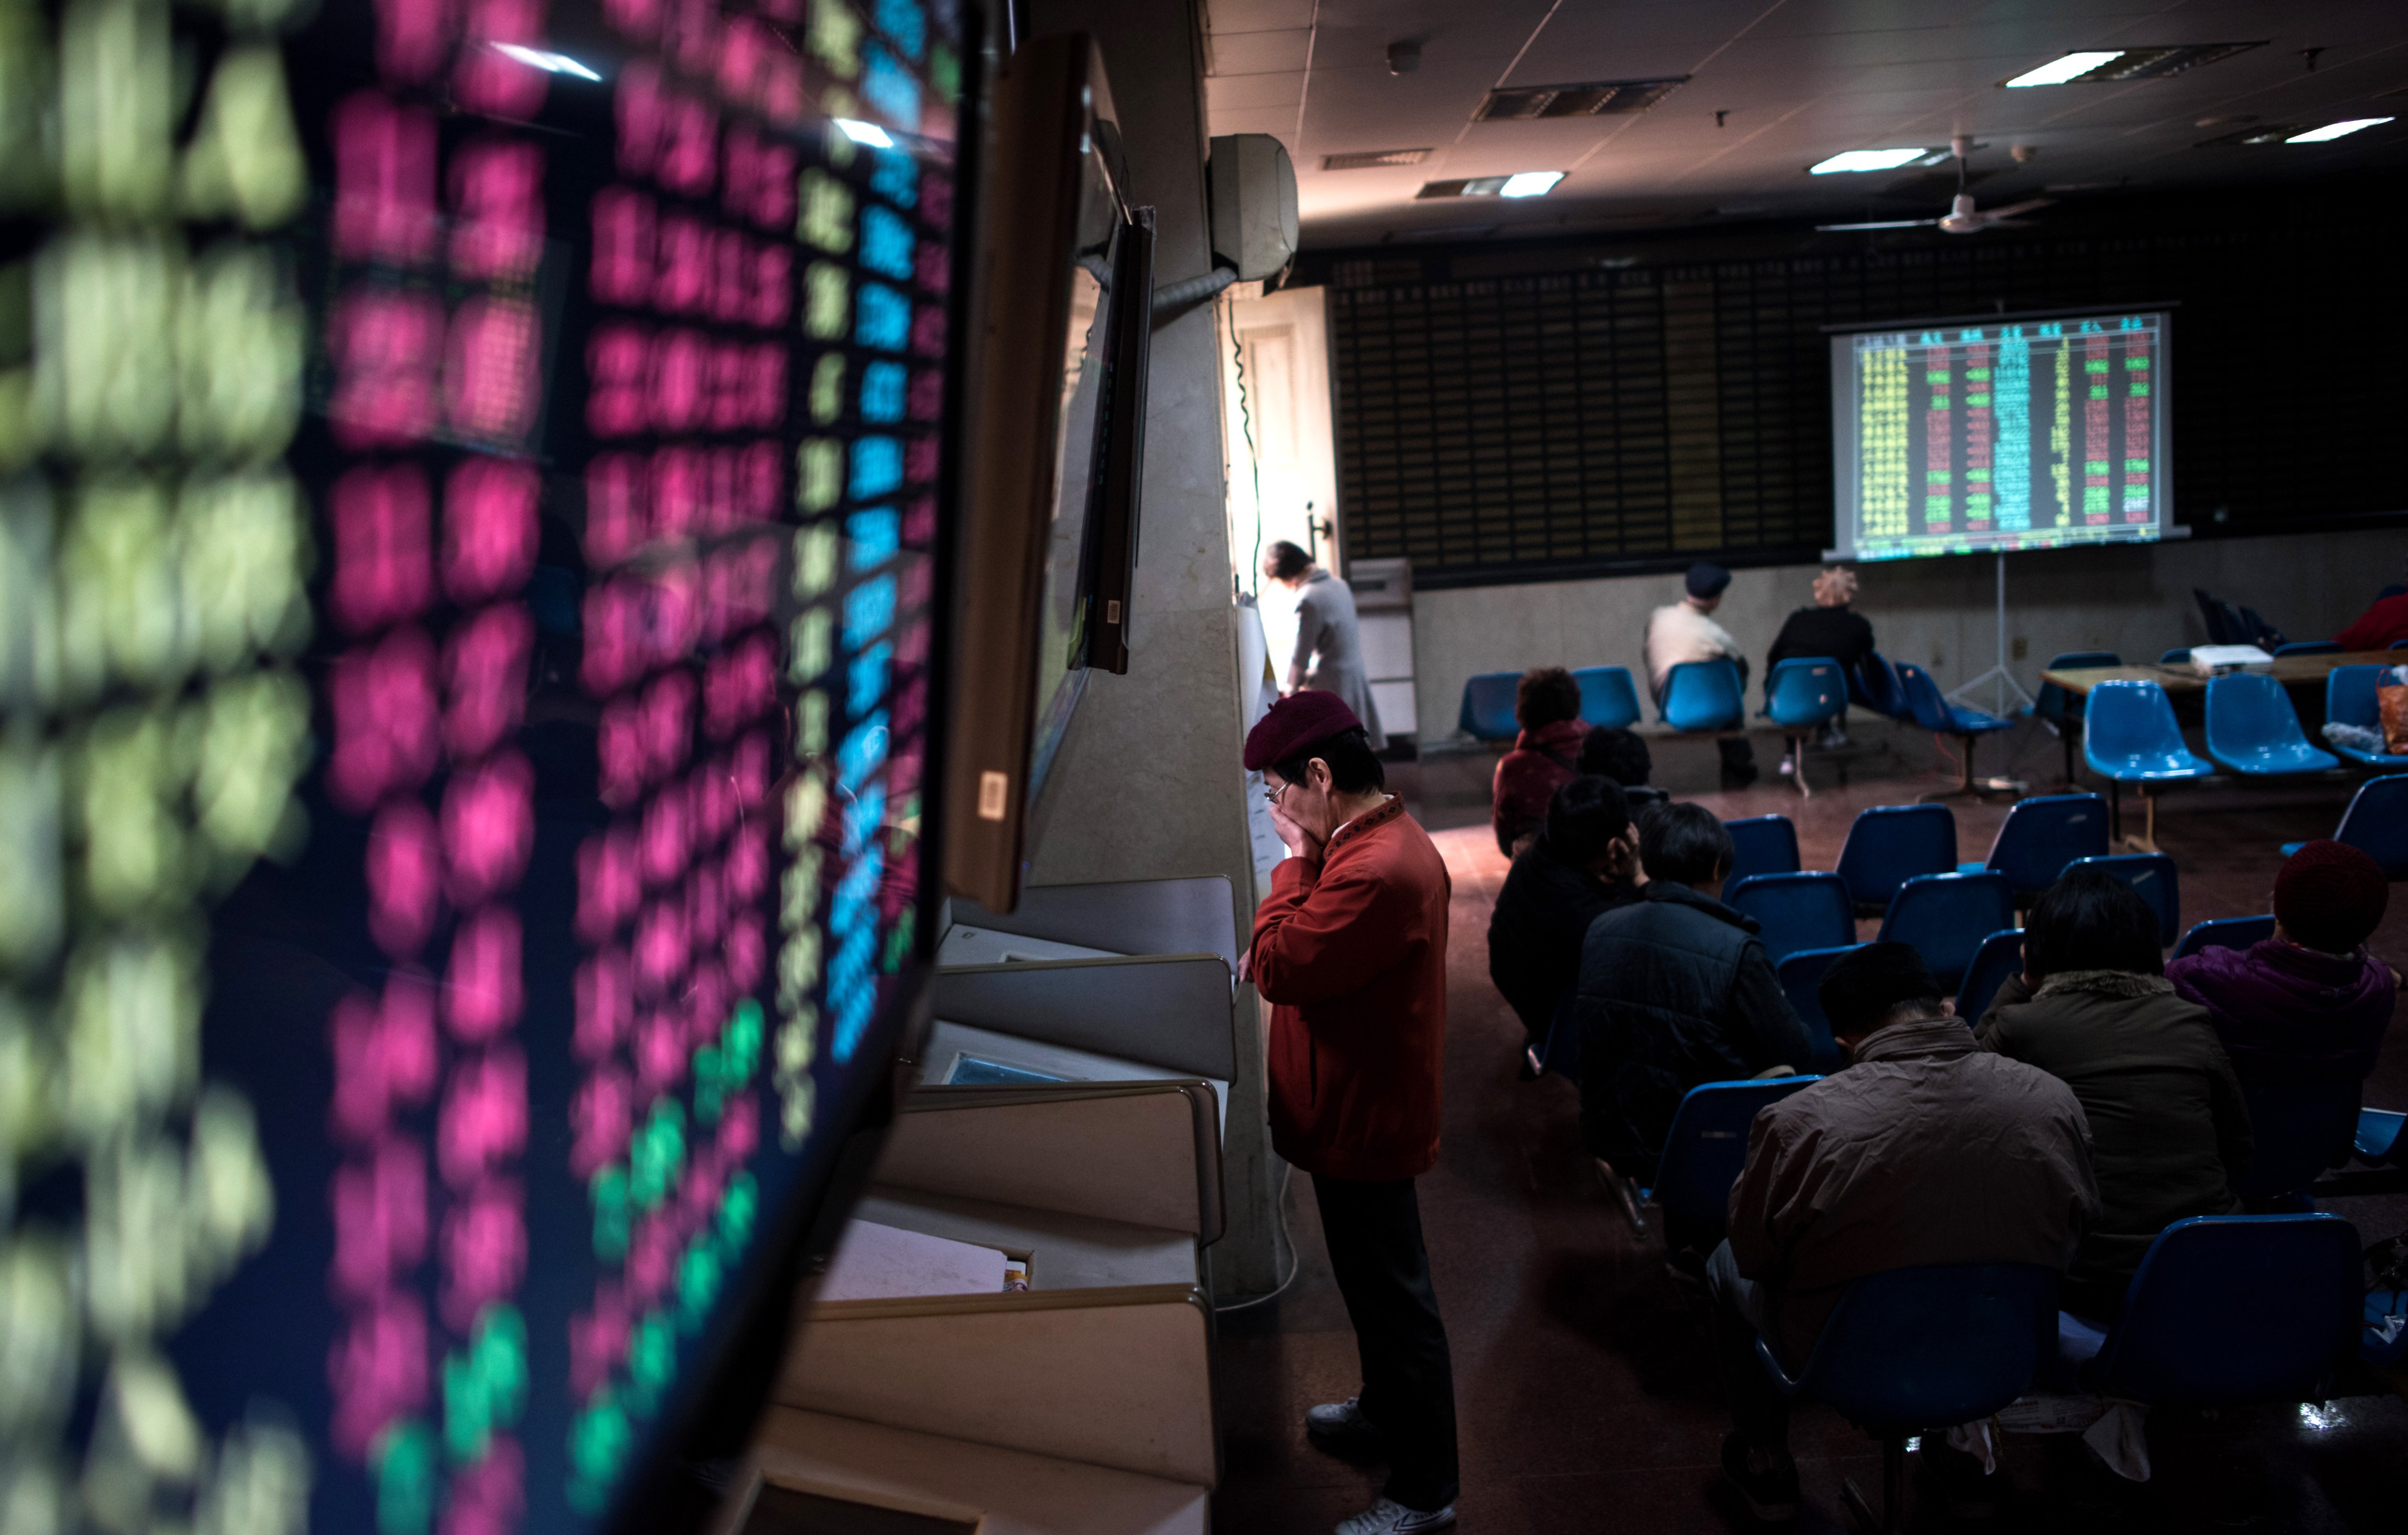 In this photo taken on December 15, 2015, an investor monitors screens showing stock market movements at a brokerage house in Shanghai. (AFP/Getty Images)